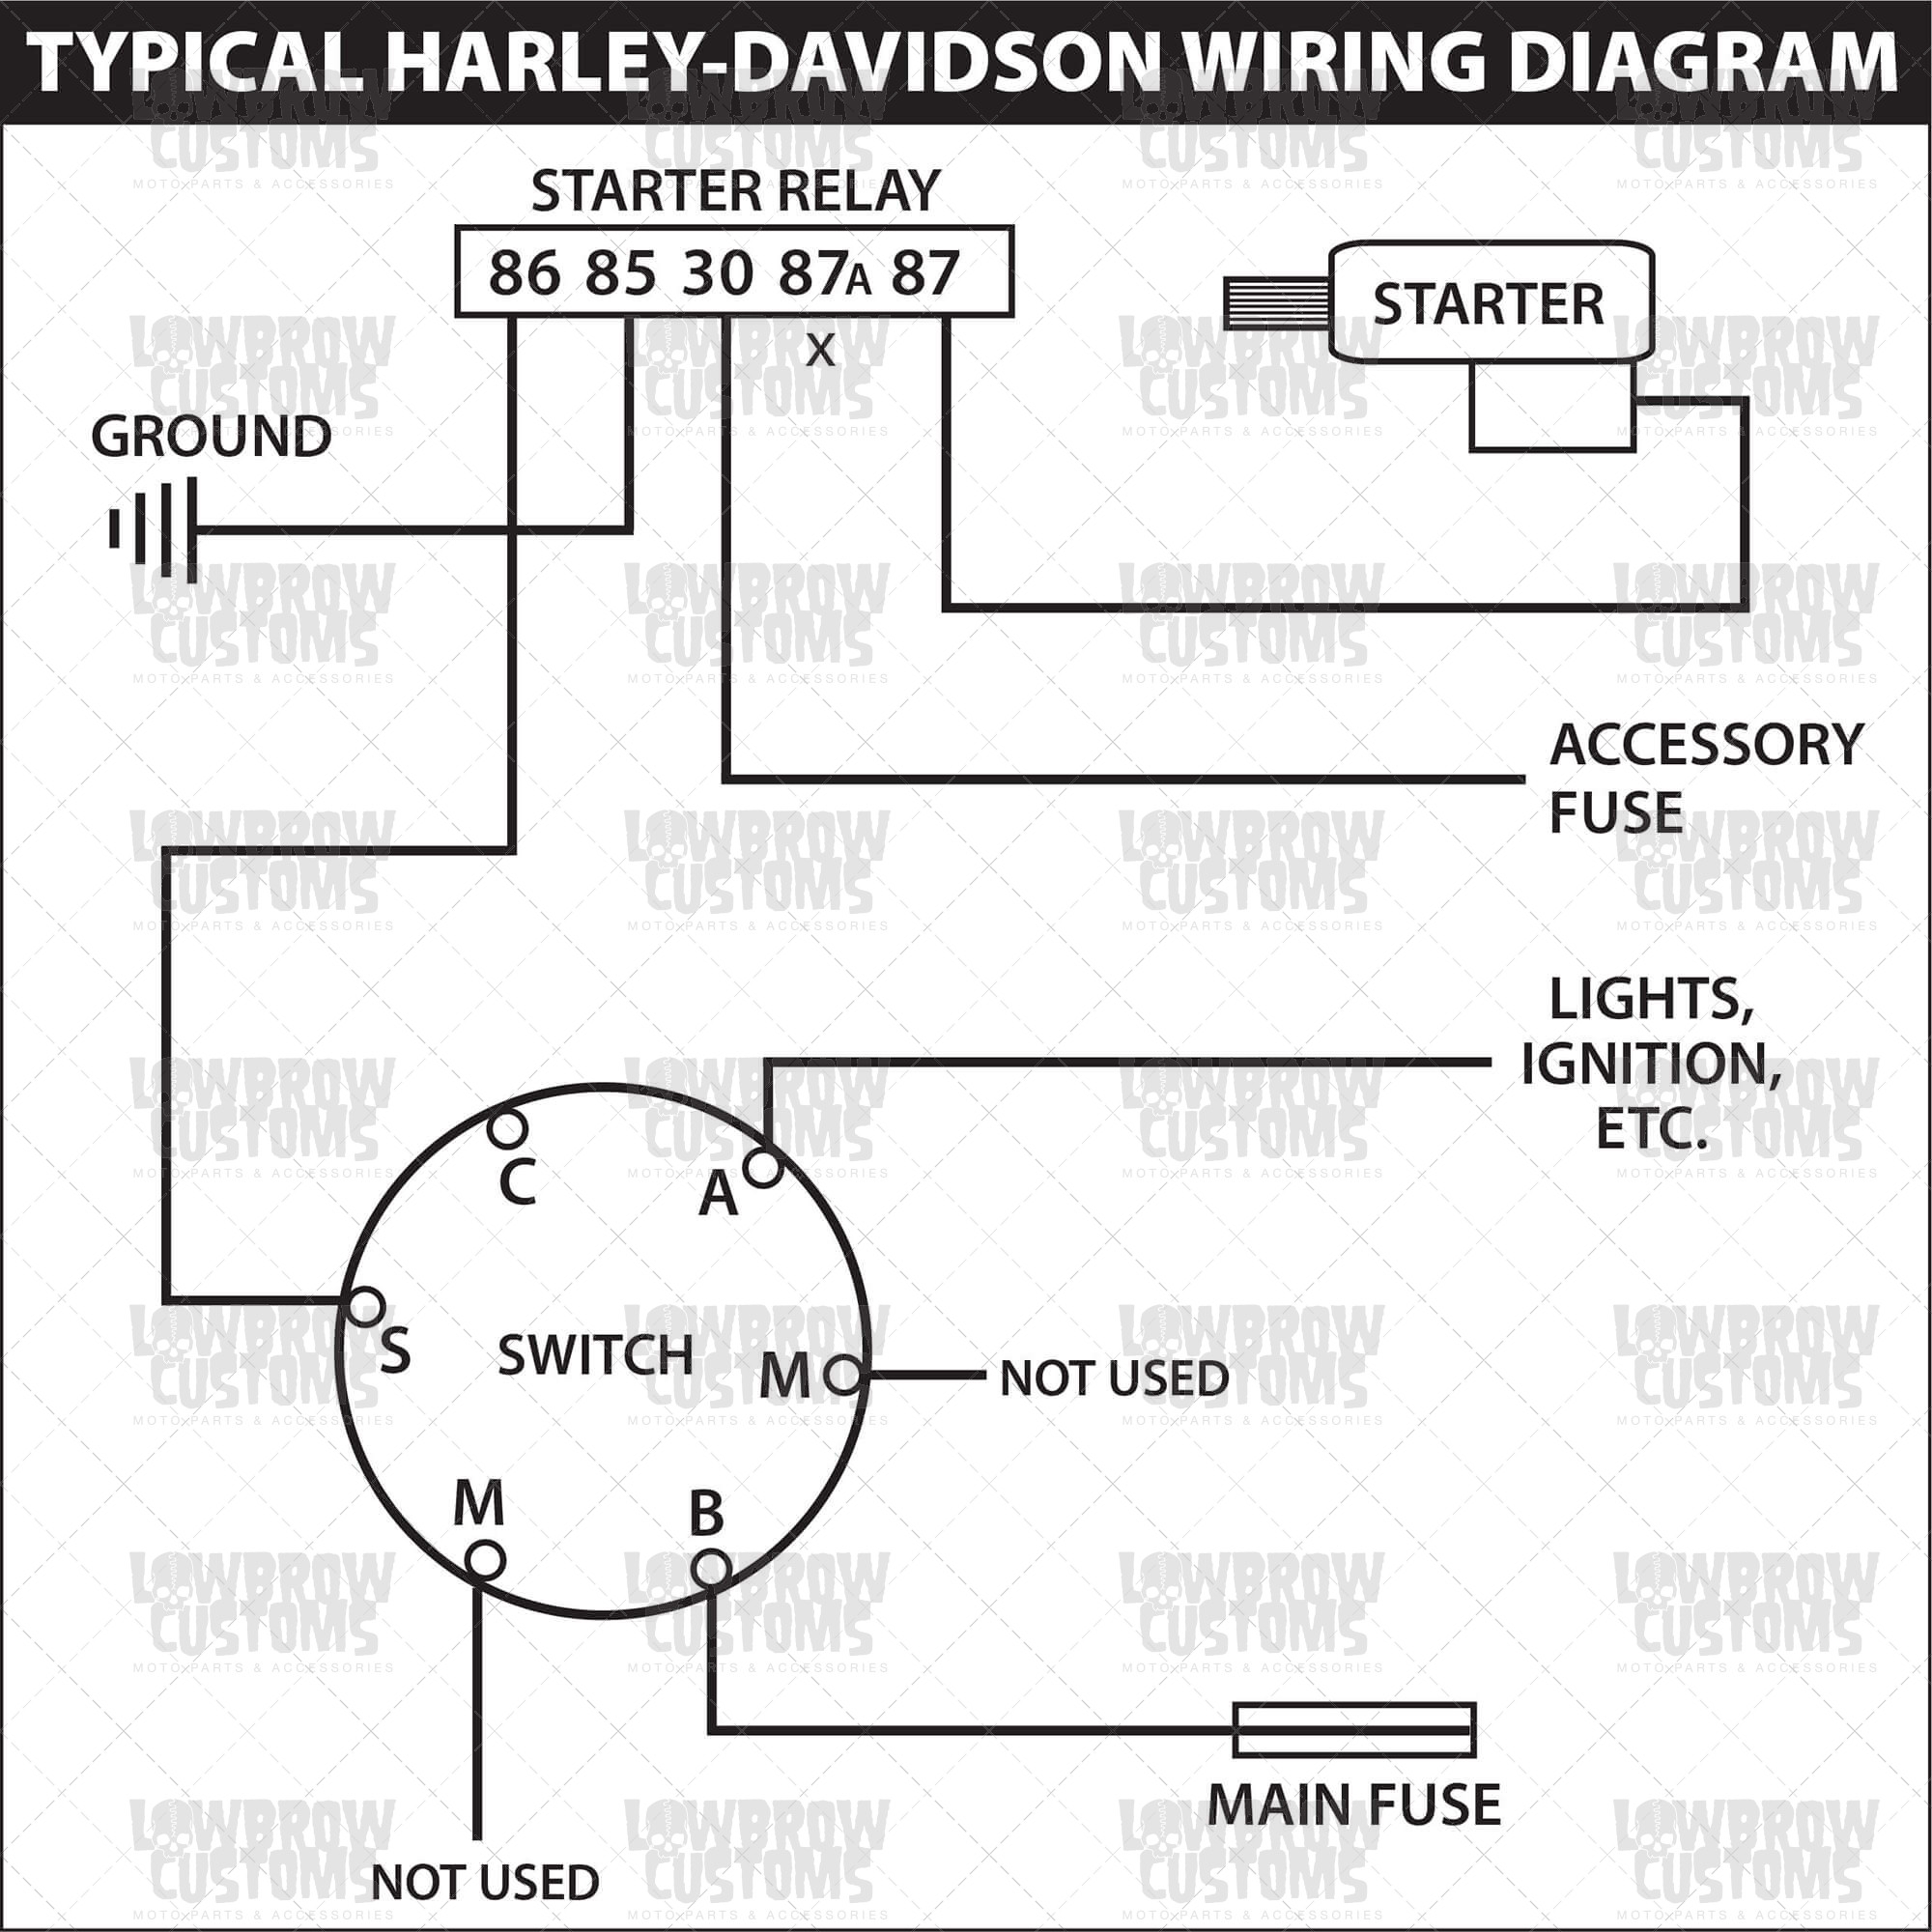 Evinrude Ignition Switch Wiring Diagram Wiring Diagram For Ignition Switch Wiring Diagram Local